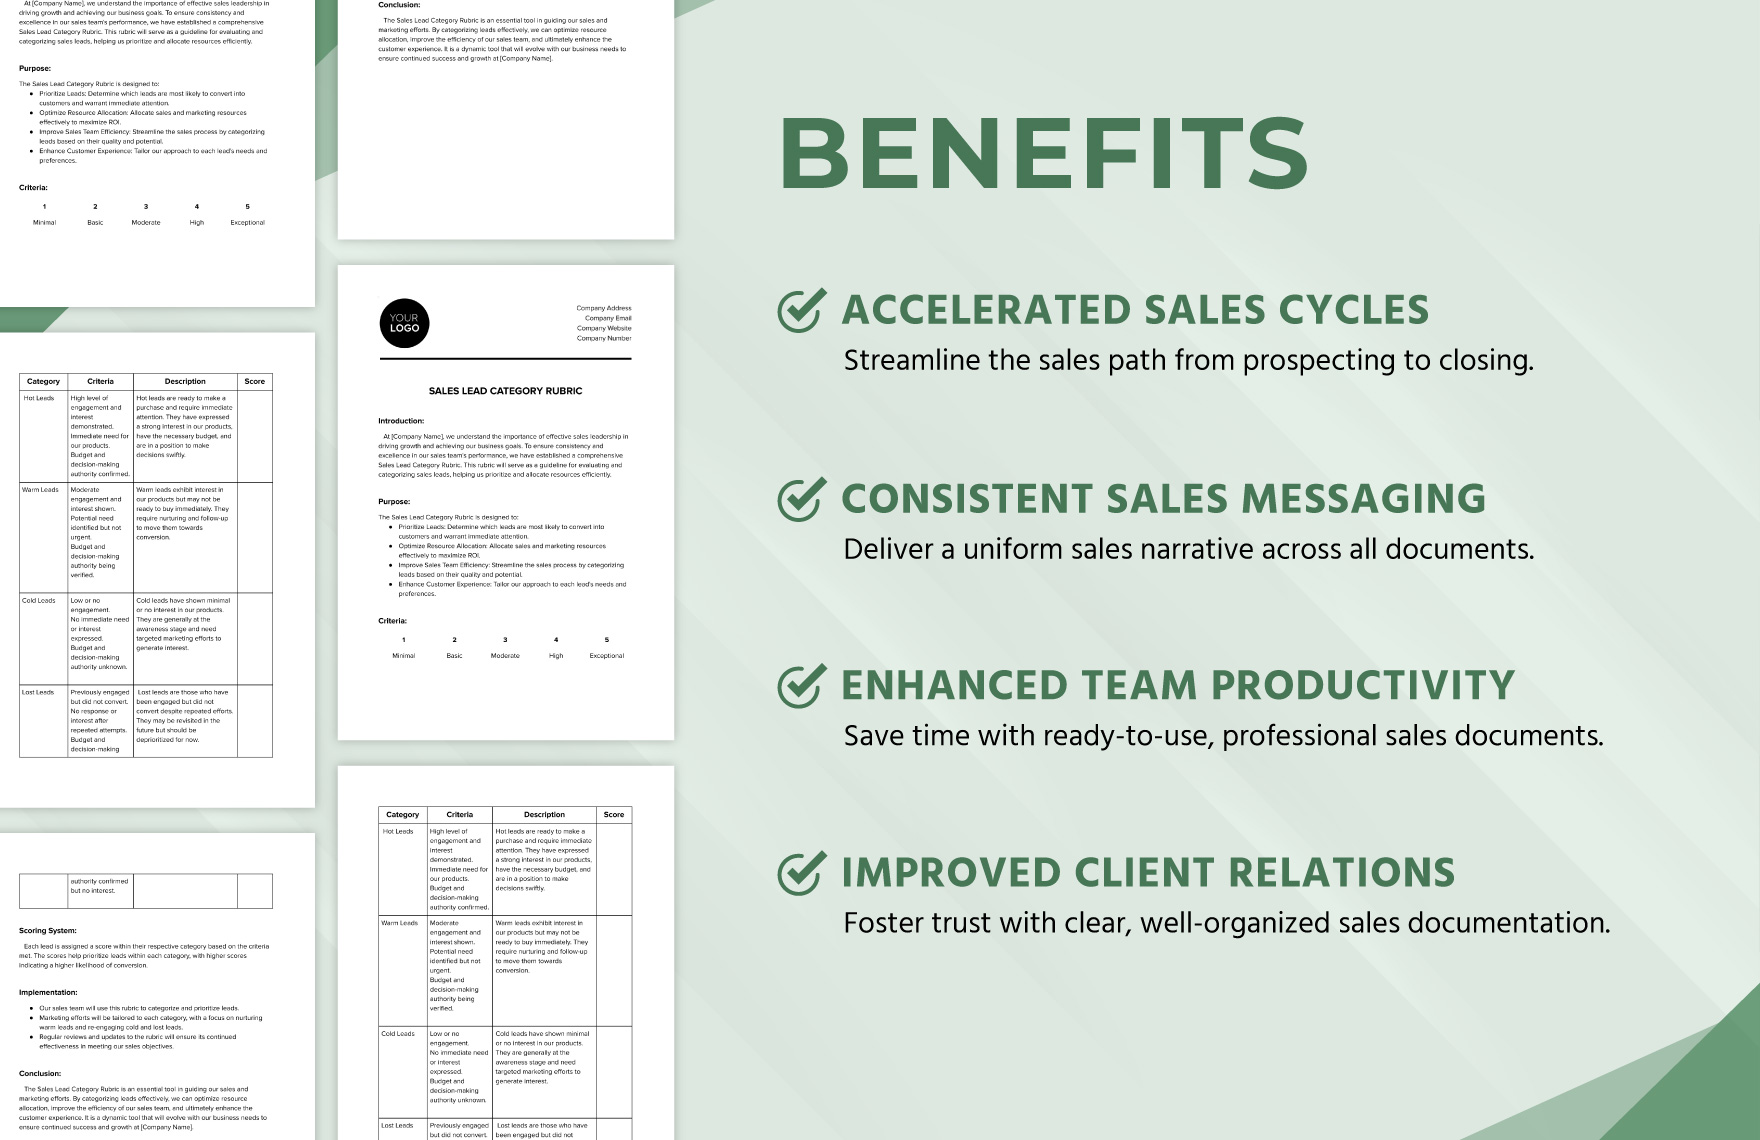 Sales Lead Category Rubric Template